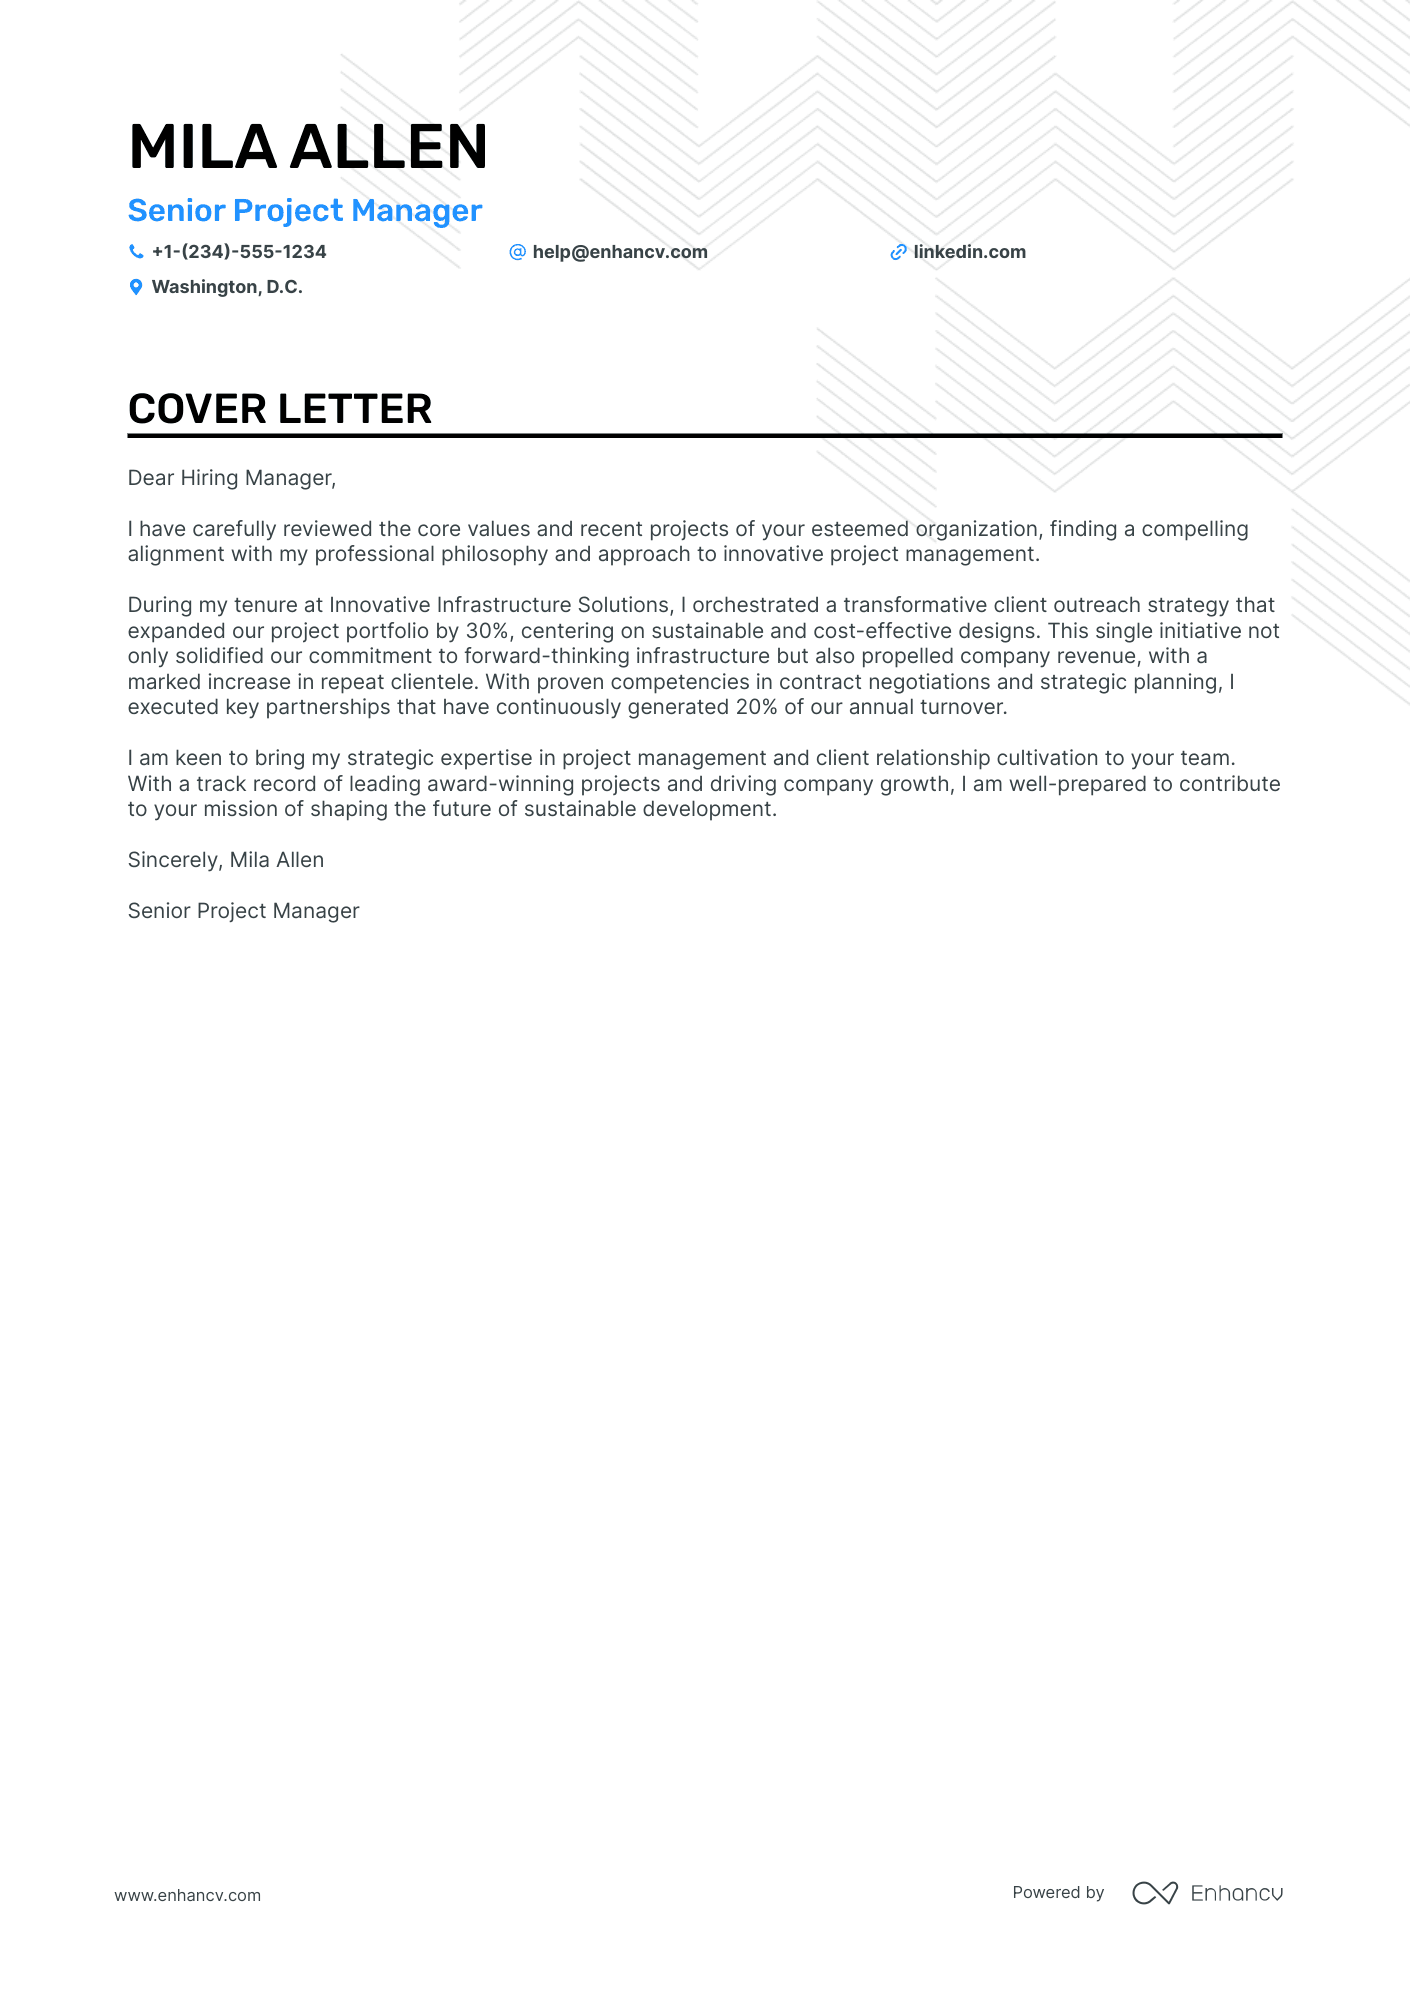 CRM Project Manager cover letter